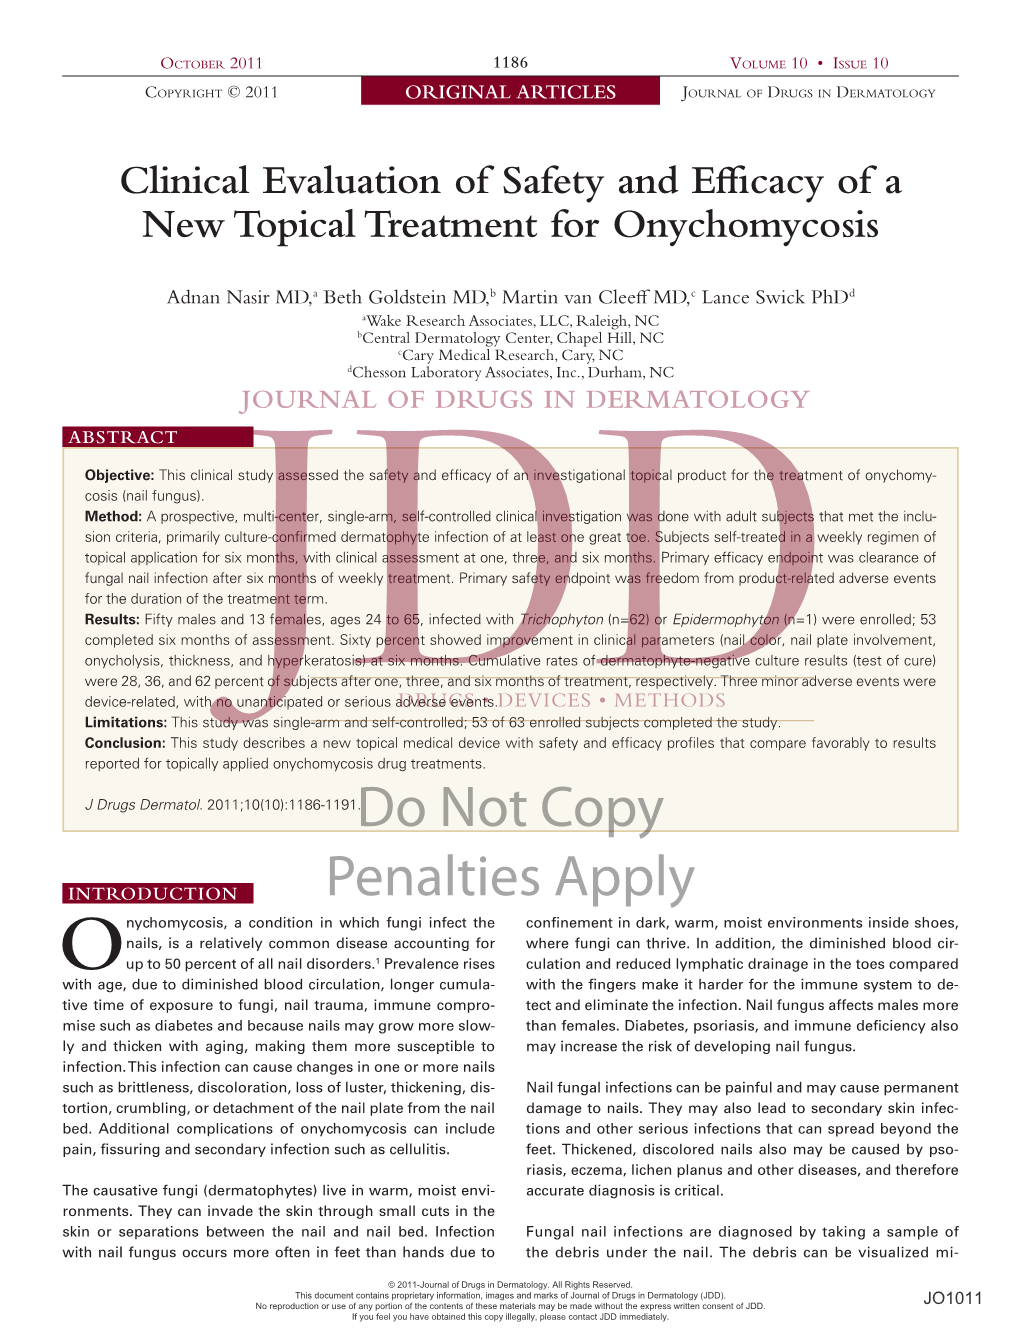 Clinical Evaluation of Safety and Efficacy of a New Topical Treatment for Onychomycosis